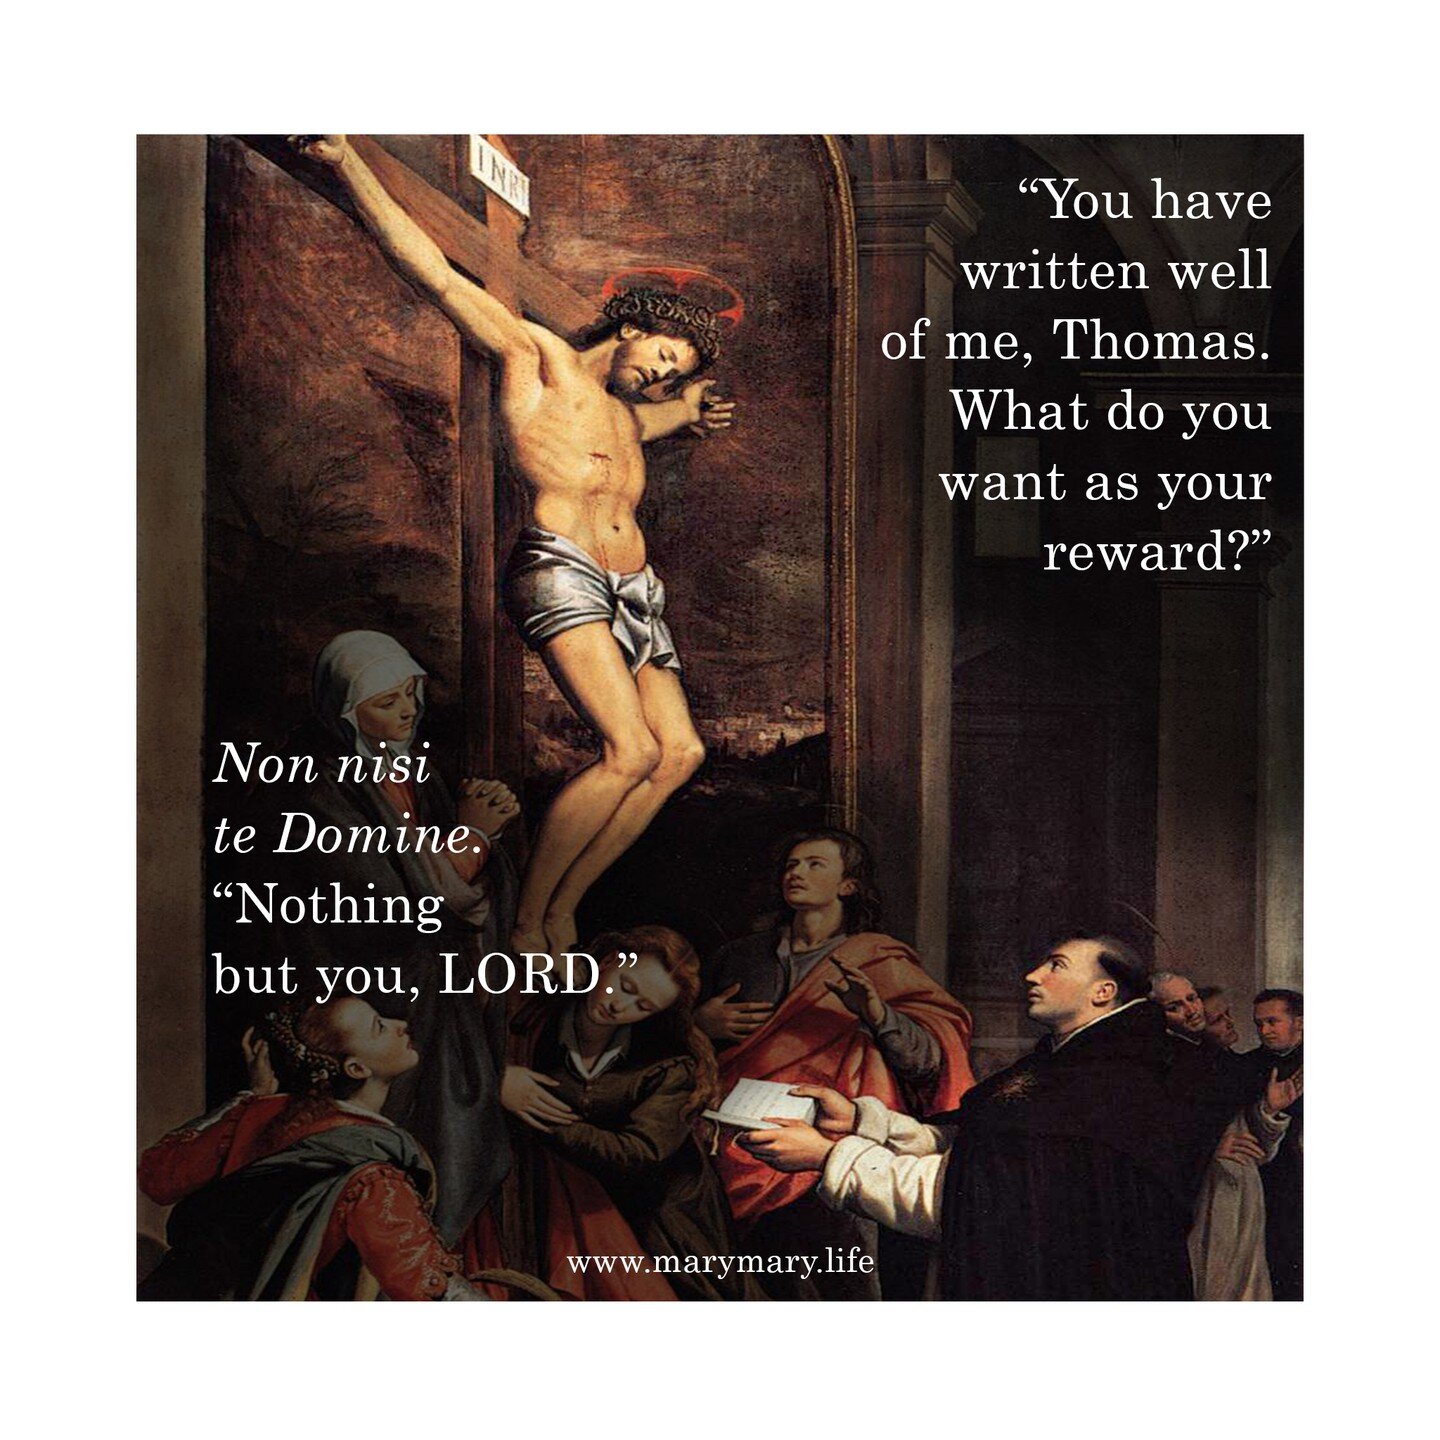 Non nisi te Domine. 
&quot;Nothing but you, Lord&quot; Thomas Aquinas.

Only you, Lord. 
Because in you, we find everything our hearts long for. 

#nonnisitedomine #nothingbutyoulord #onlyyoulord #stthomasaquinas #thomasaquinas #thomasaquinasquotes #